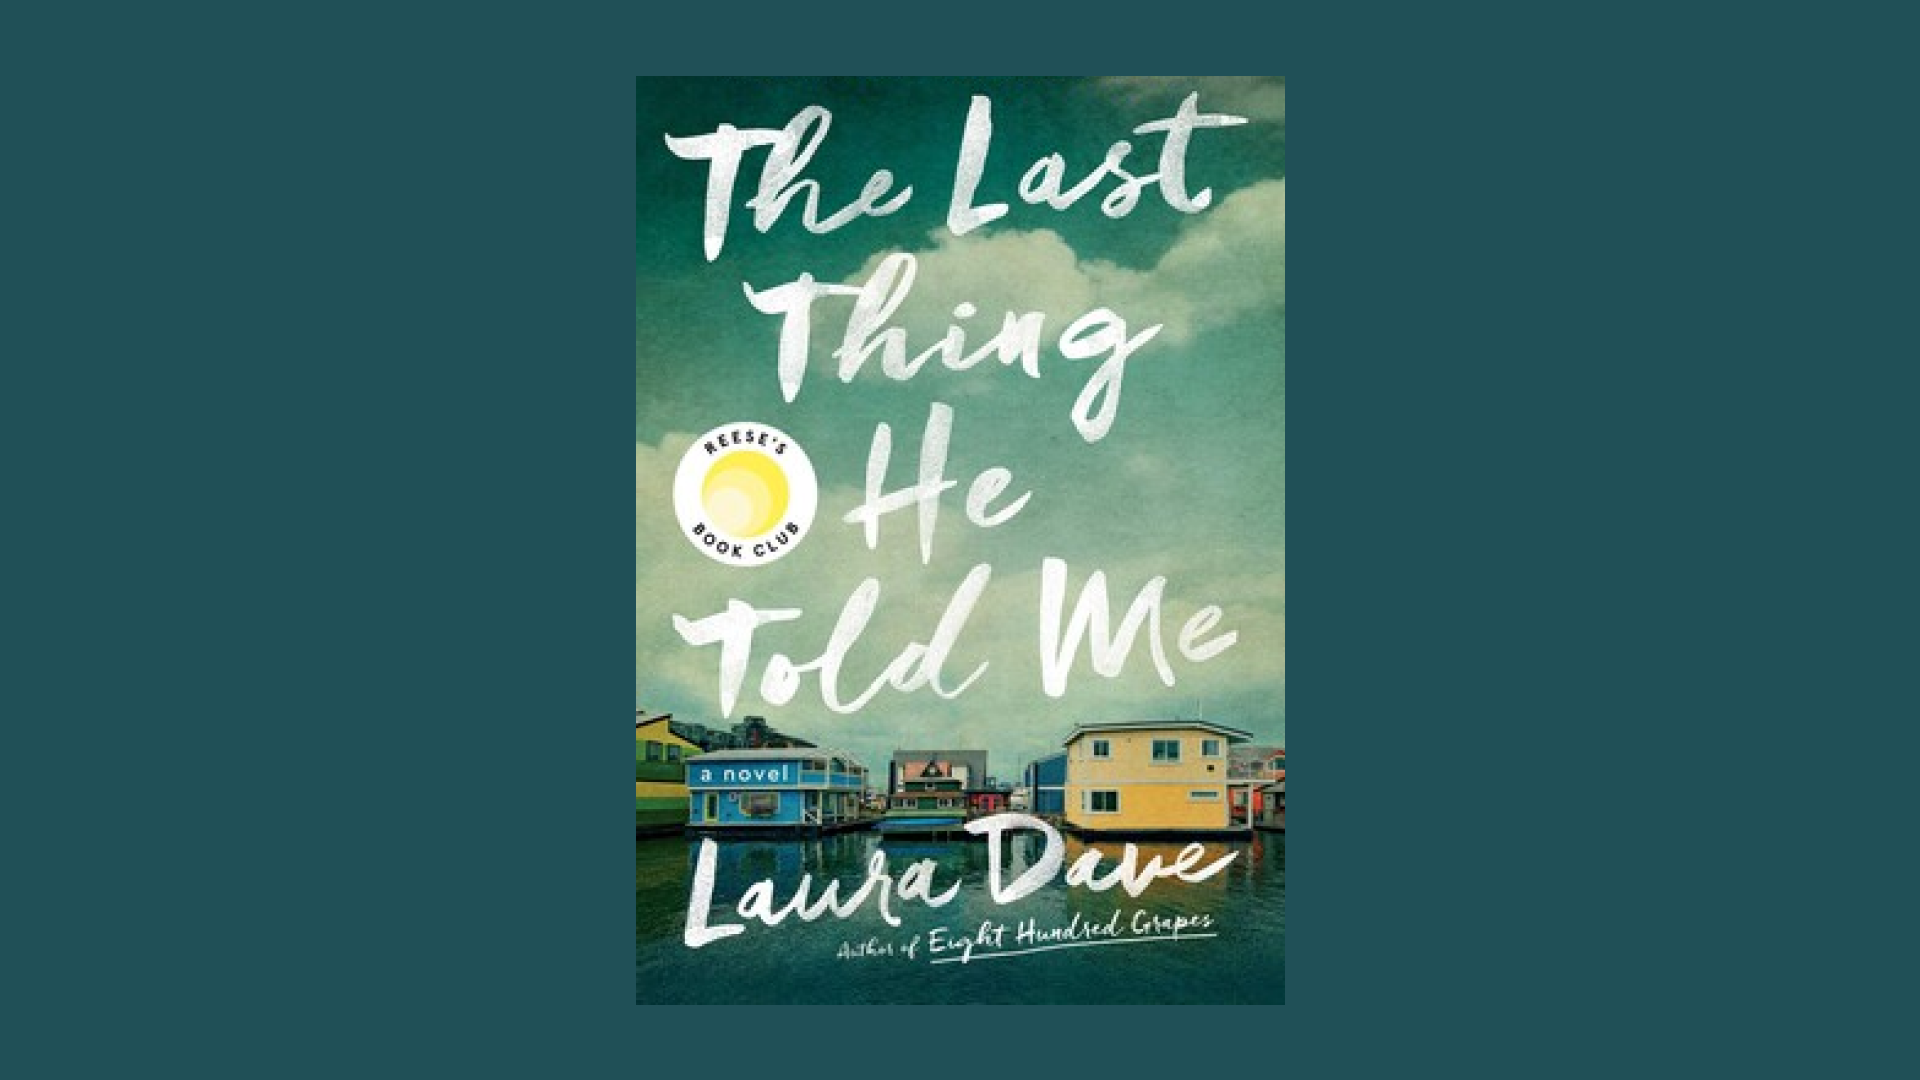 “The Last Thing He Told Me” by Laura Dave 